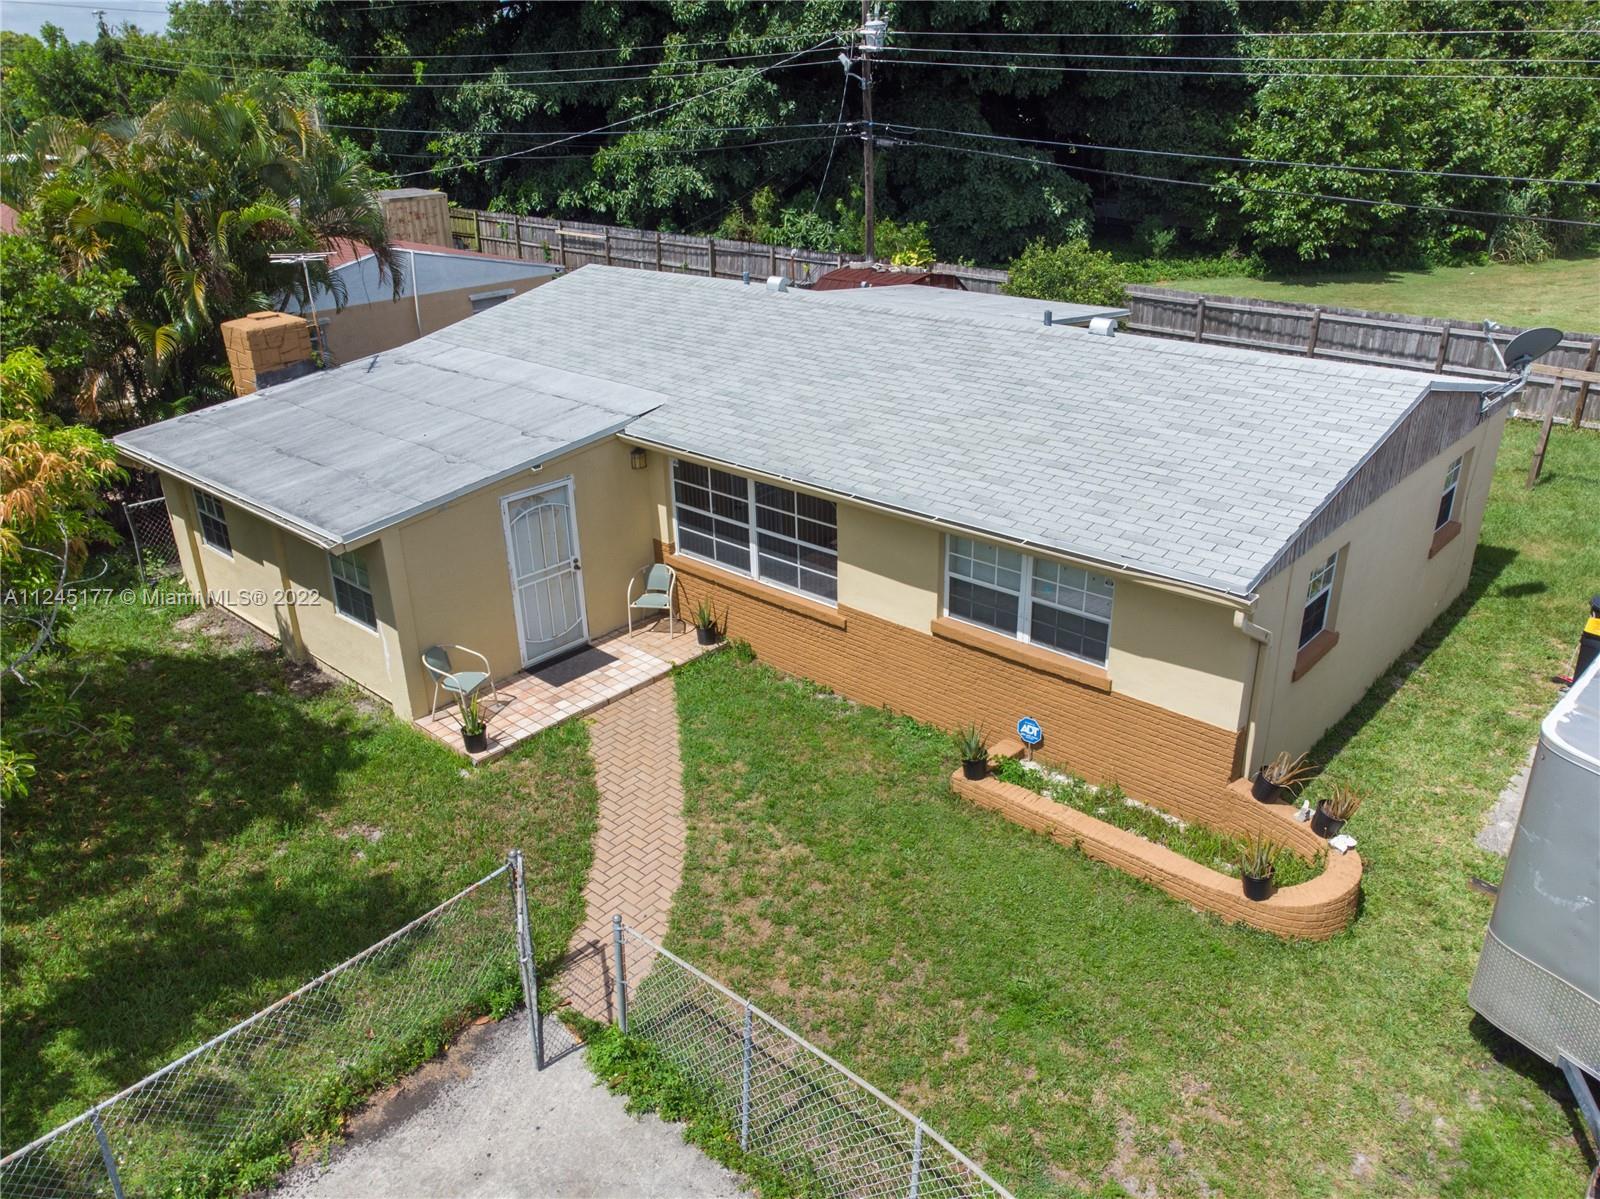 EXCELLENT SINGLE-FAMILY HOME LOCATED IN A VERY QUIET RESIDENTIAL AREA.   1 STORY 3 BE 2 BA  HOME, TI